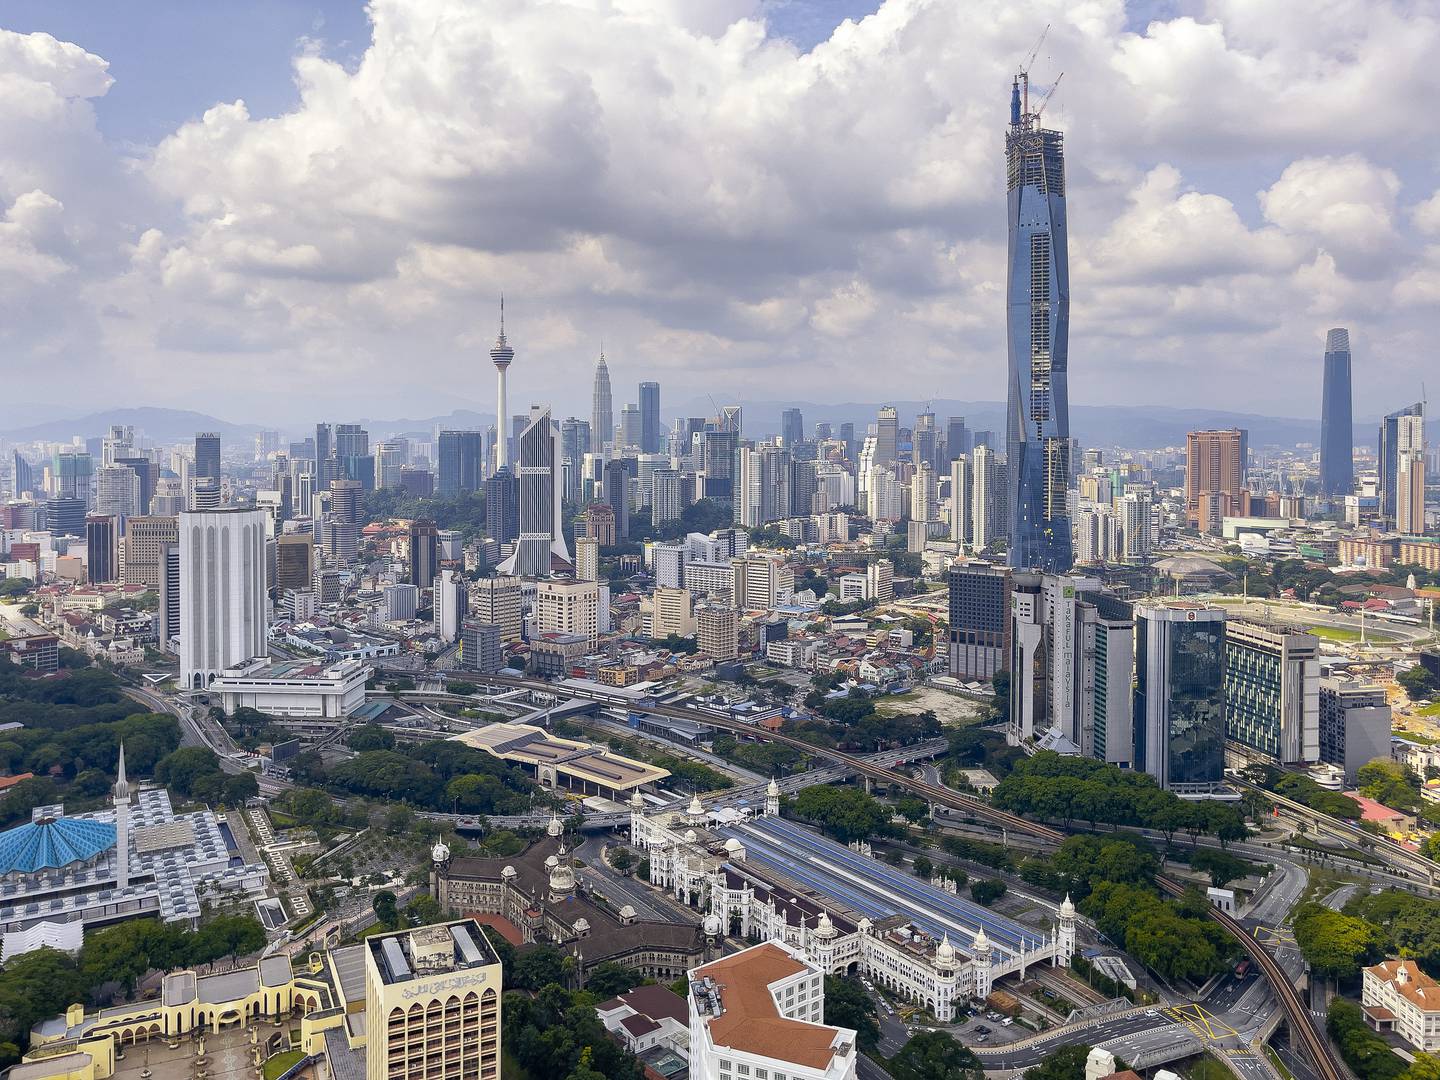 Merdeka 118 is set to be the world's second-largest building. Getty Images